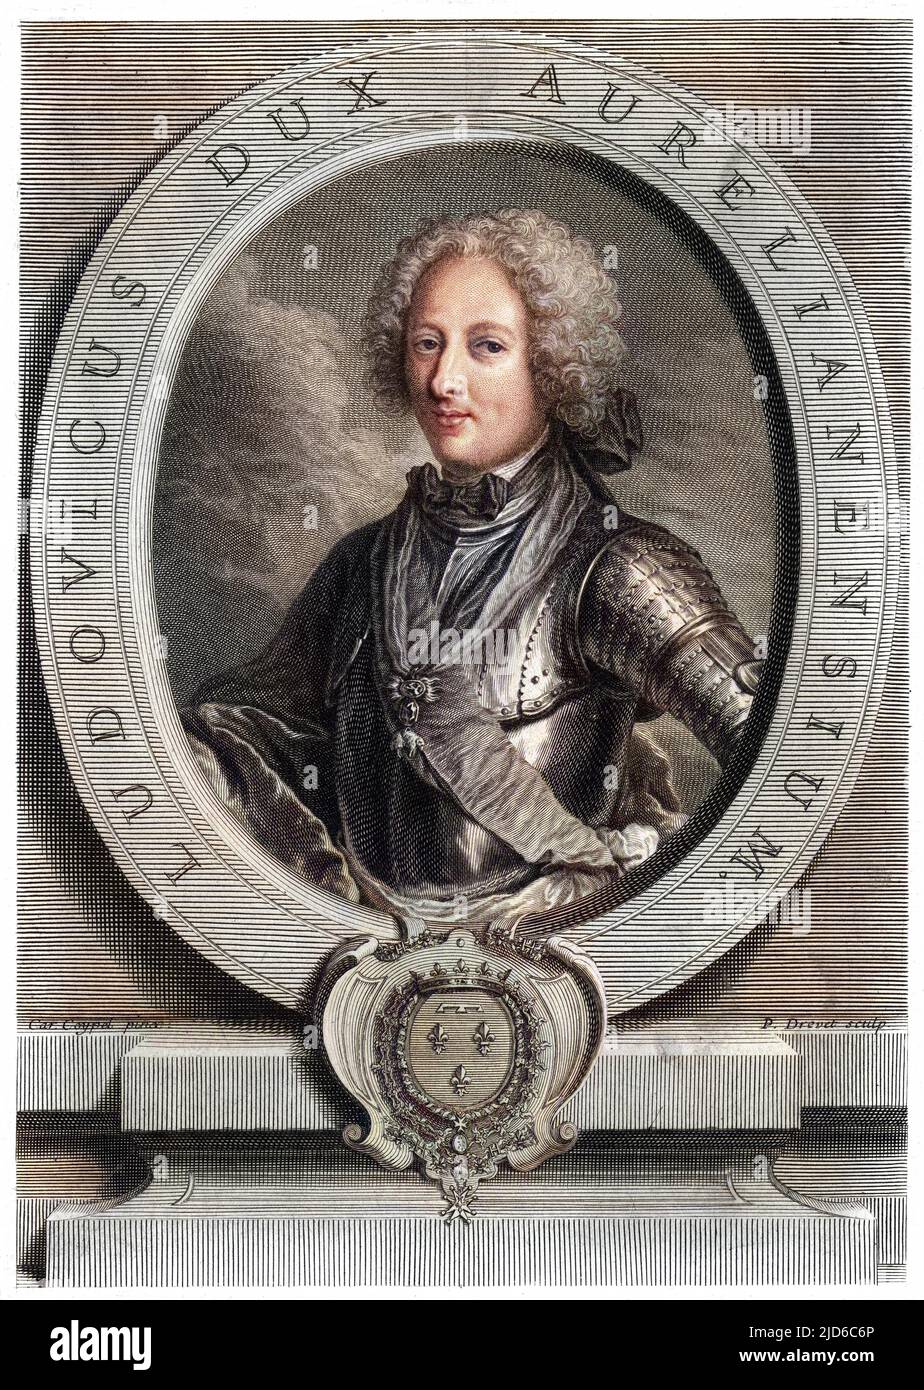 LOUIS duc d'ORLEANS son of Philippe II duc d'Orleans, father of Louis Philippe I duc d'Orleans. Colourised version of : 10171439       Date: 1703 - 1752 Stock Photo